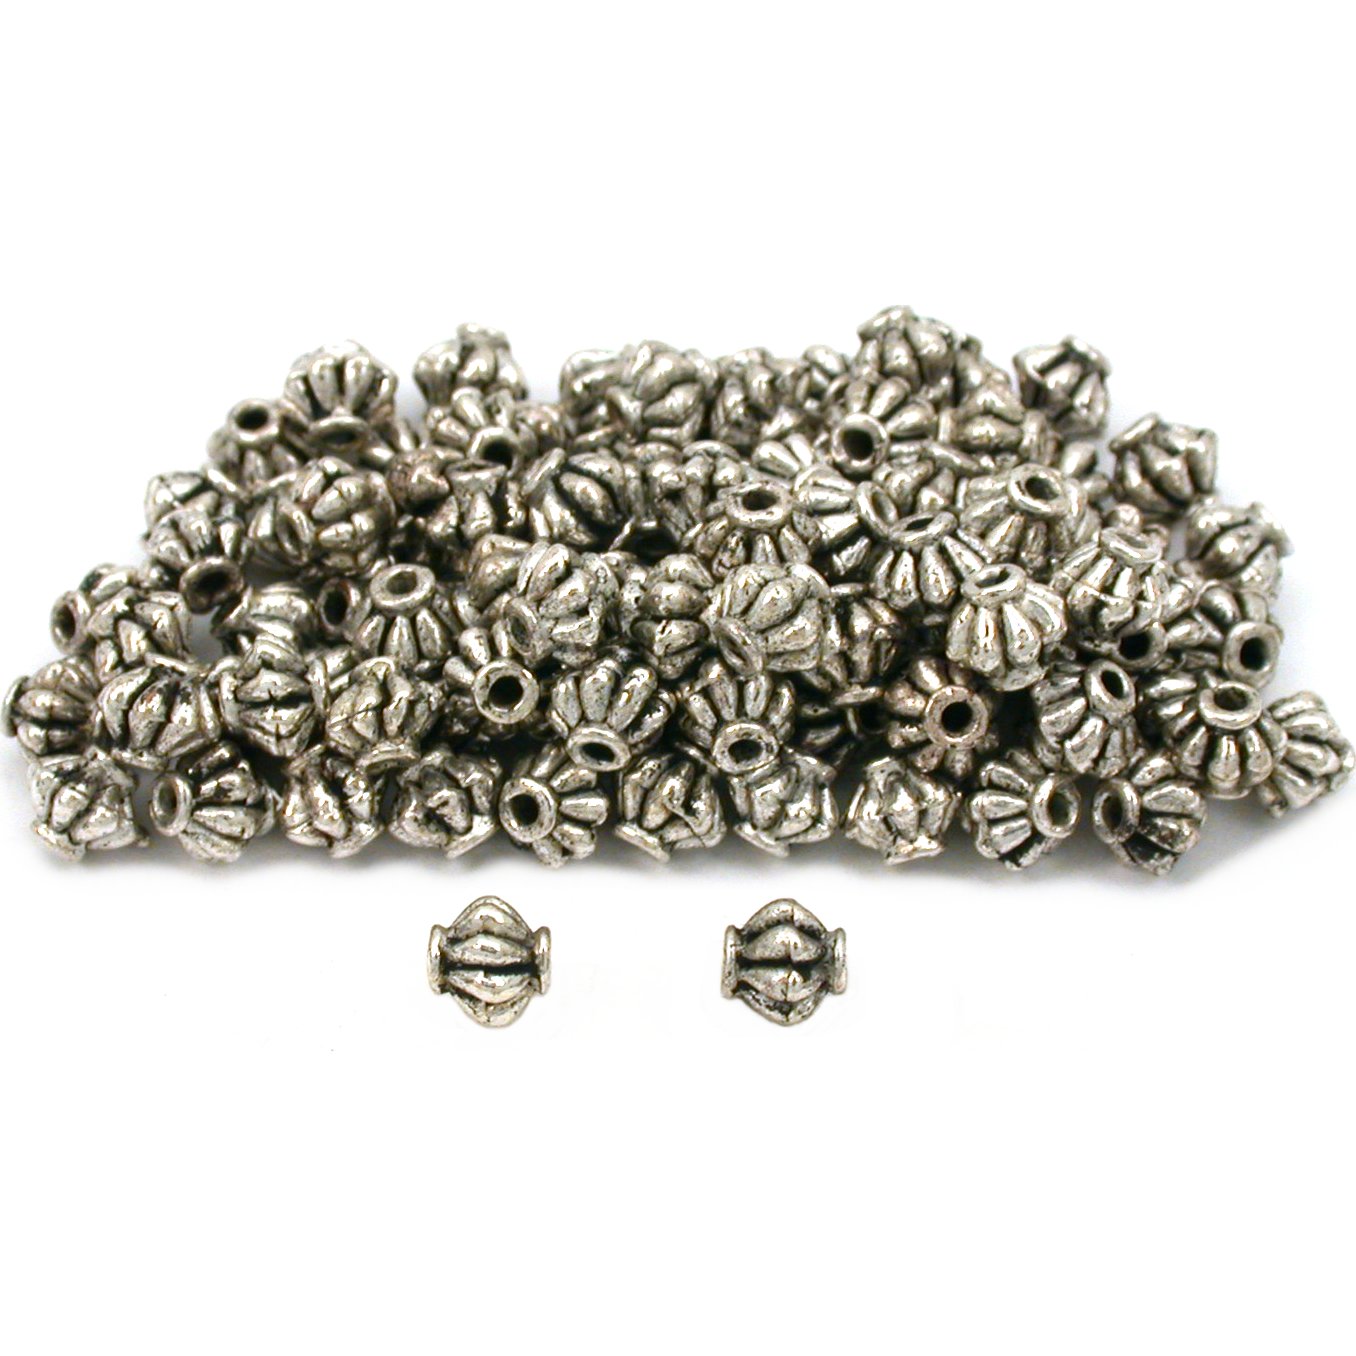 Fluted Bali Beads Antique Silver Plated 5mm Approx 100